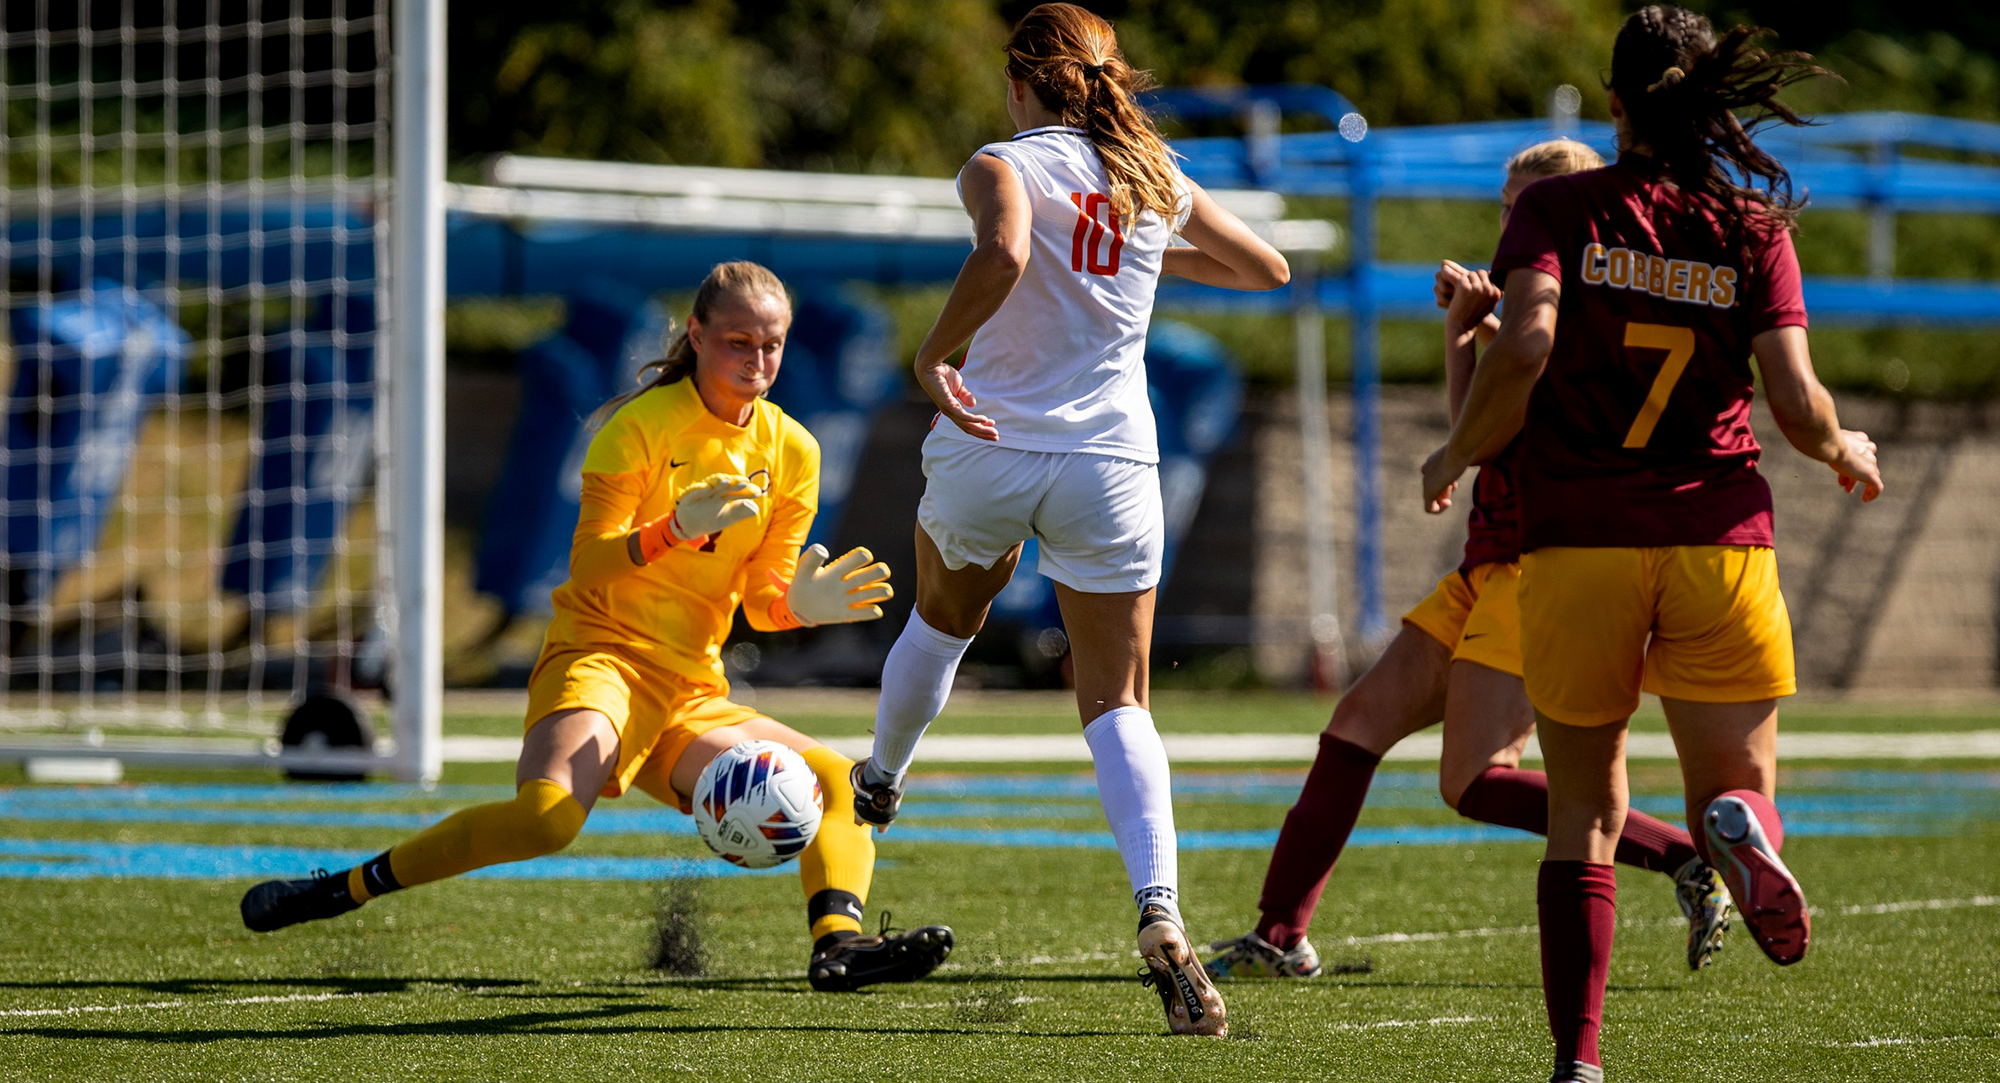 Senior goalie Bre Nelson makes one of her five saves in the Cobbers' 0-0 tie at UW-Platteville. (Photo courtesy of UW-Platteville SID).